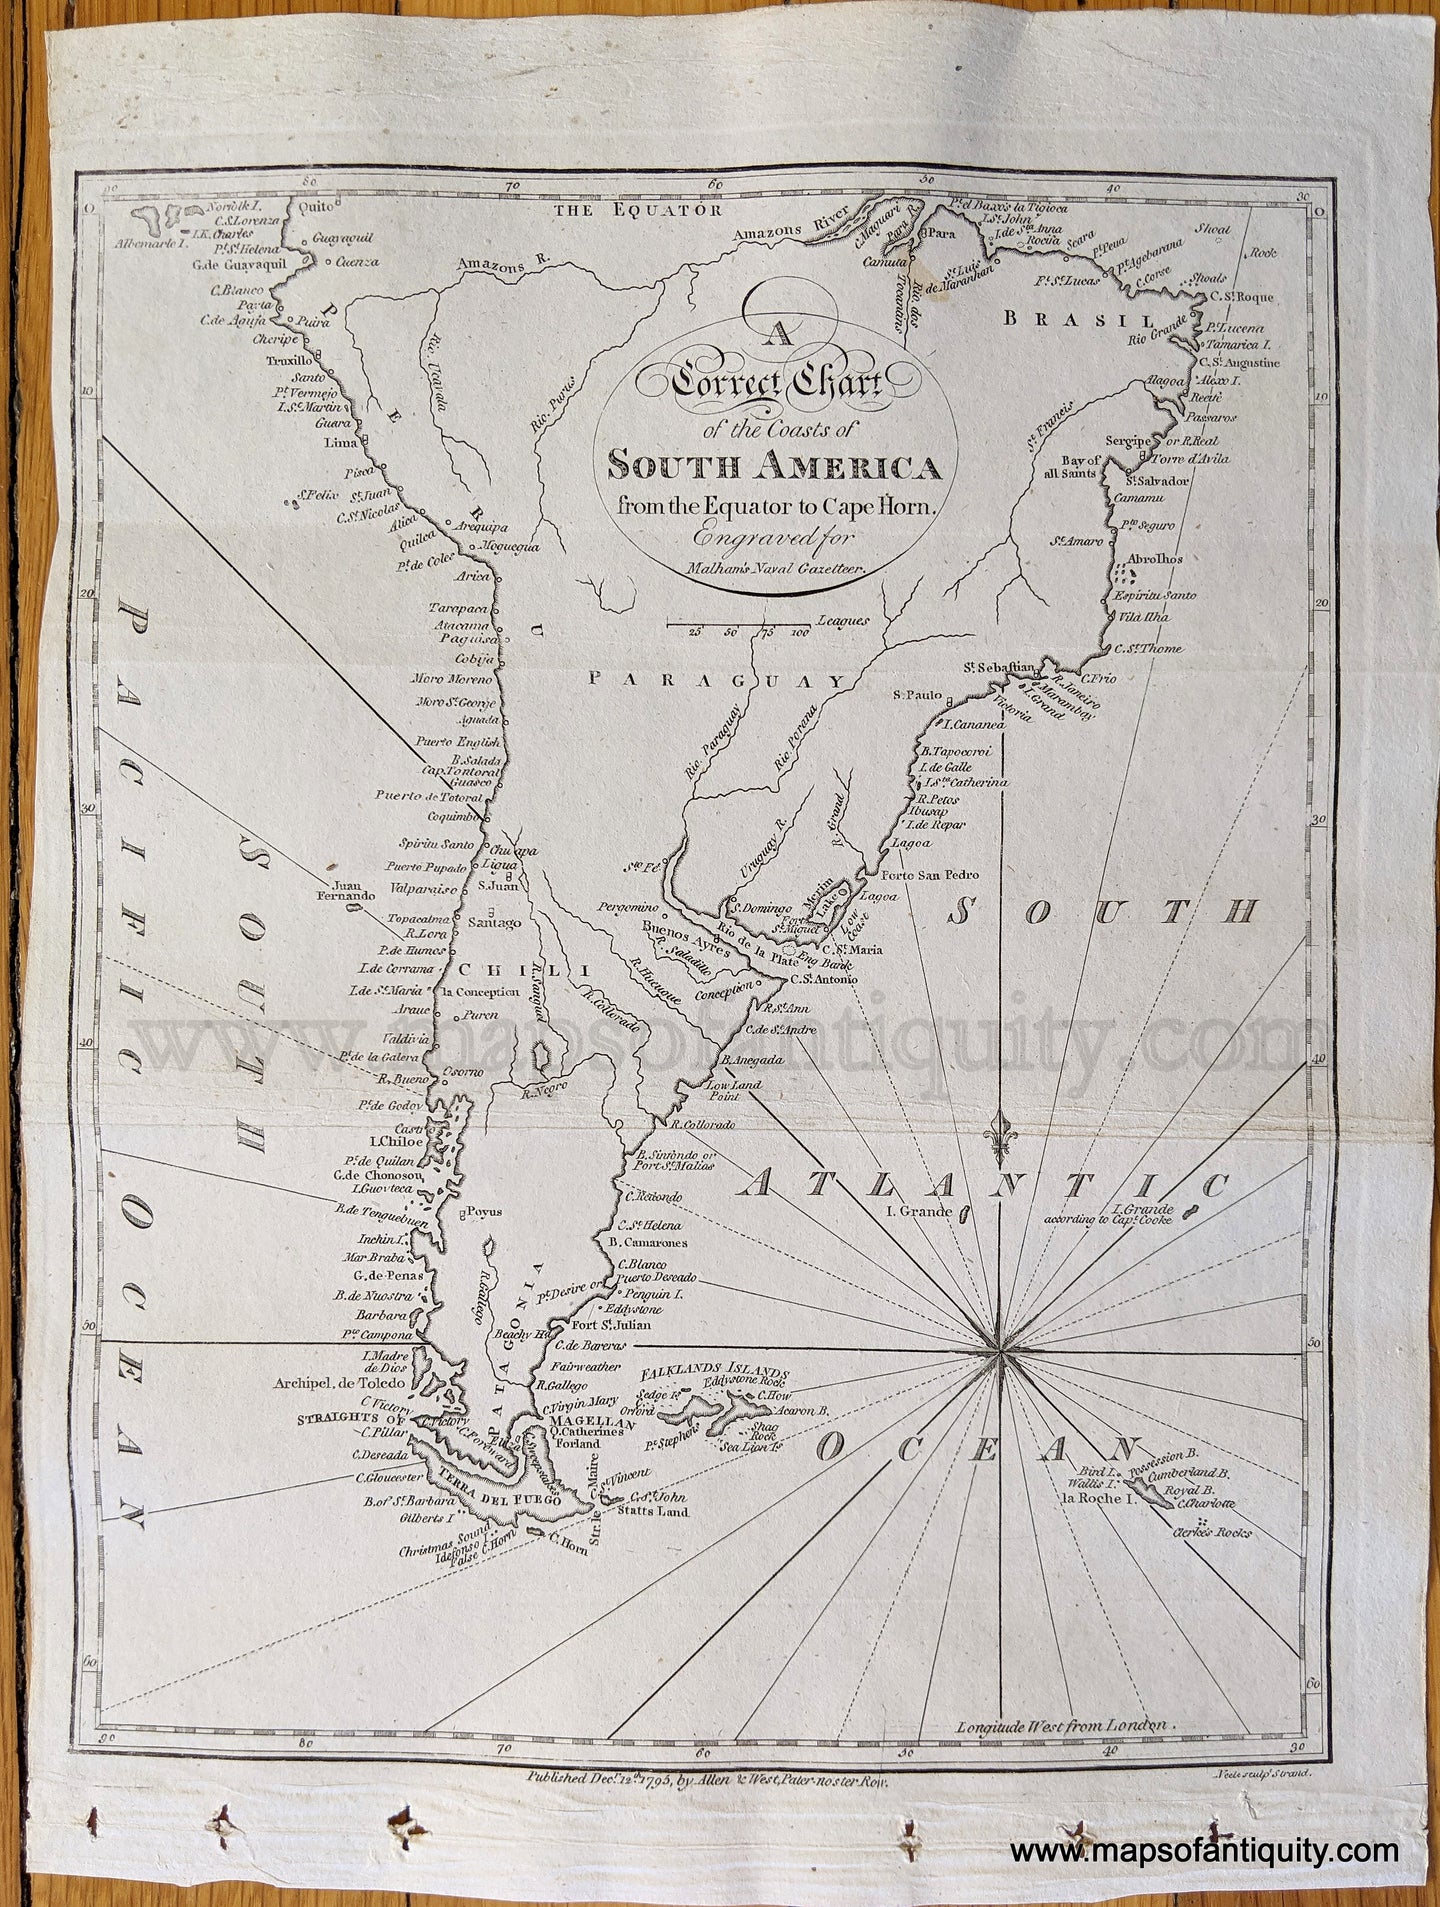 Genuine-Antique-Map-A-Correct-Chart-of-the-Coasts-of-South-America-from-the-Equator-to-Cape-Horn-South-America--1795-Malham's-Naval-Gazetteer-Maps-Of-Antiquity-1800s-19th-century